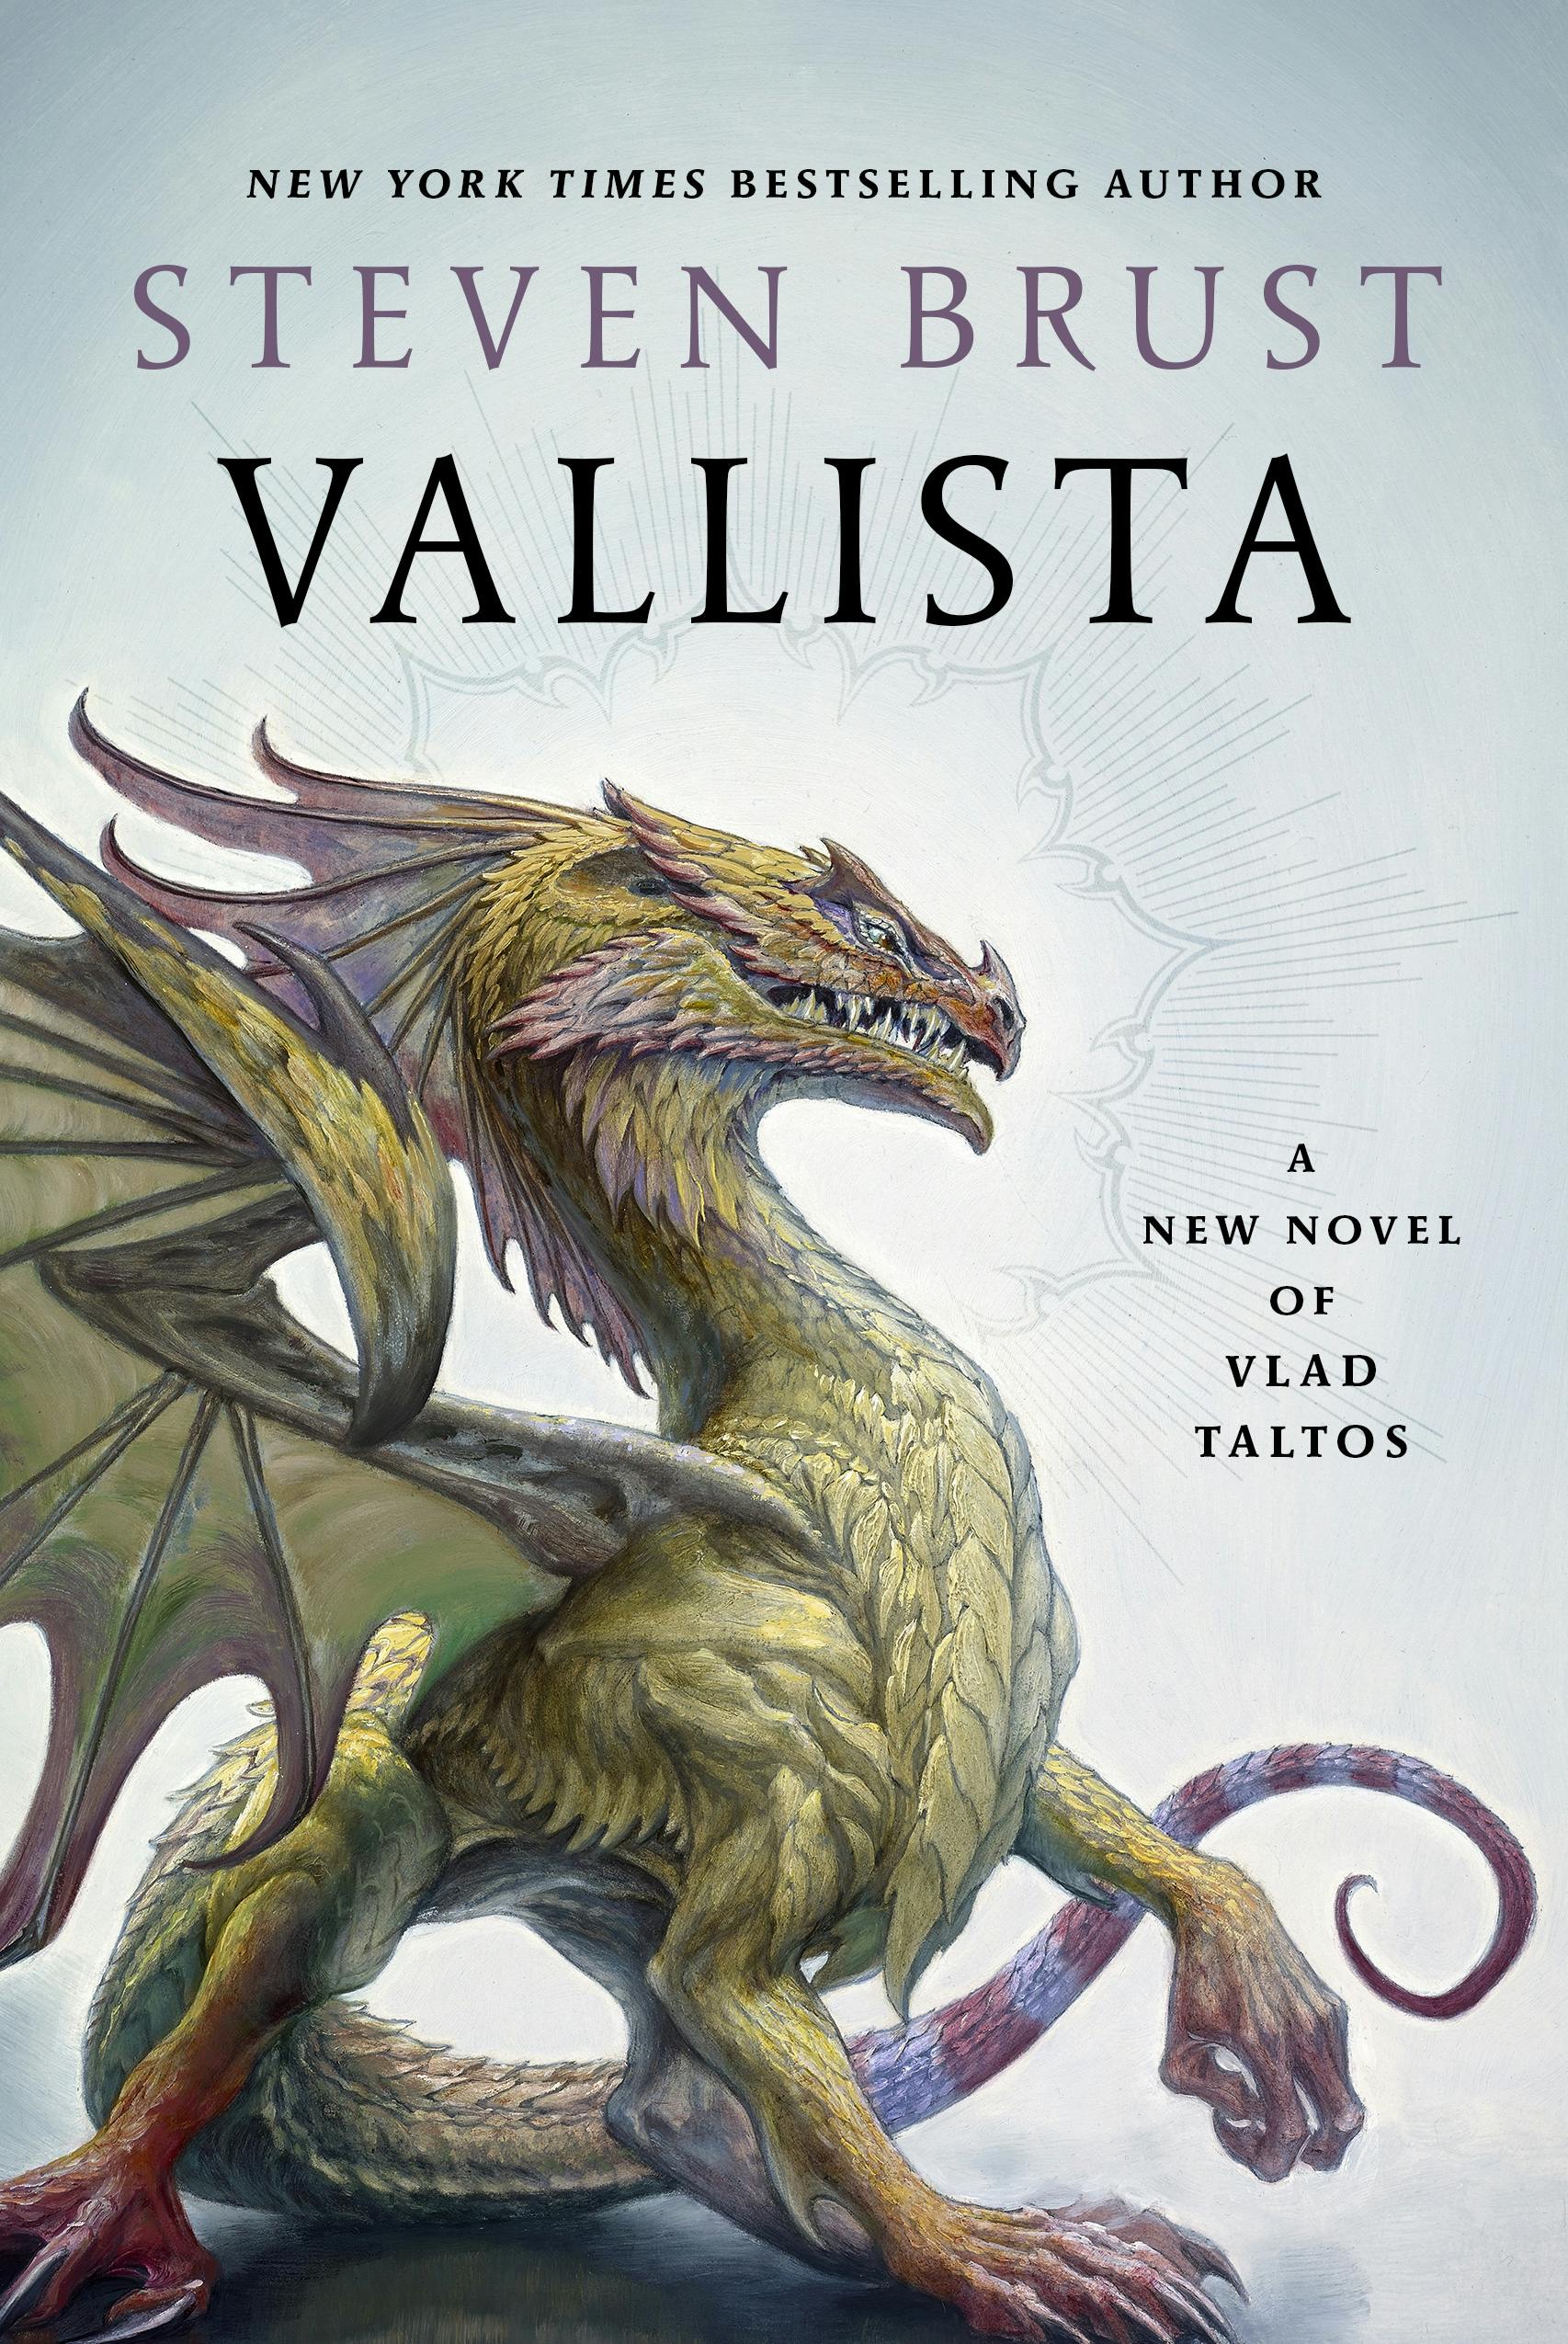 Cover for the book titled as: Vallista